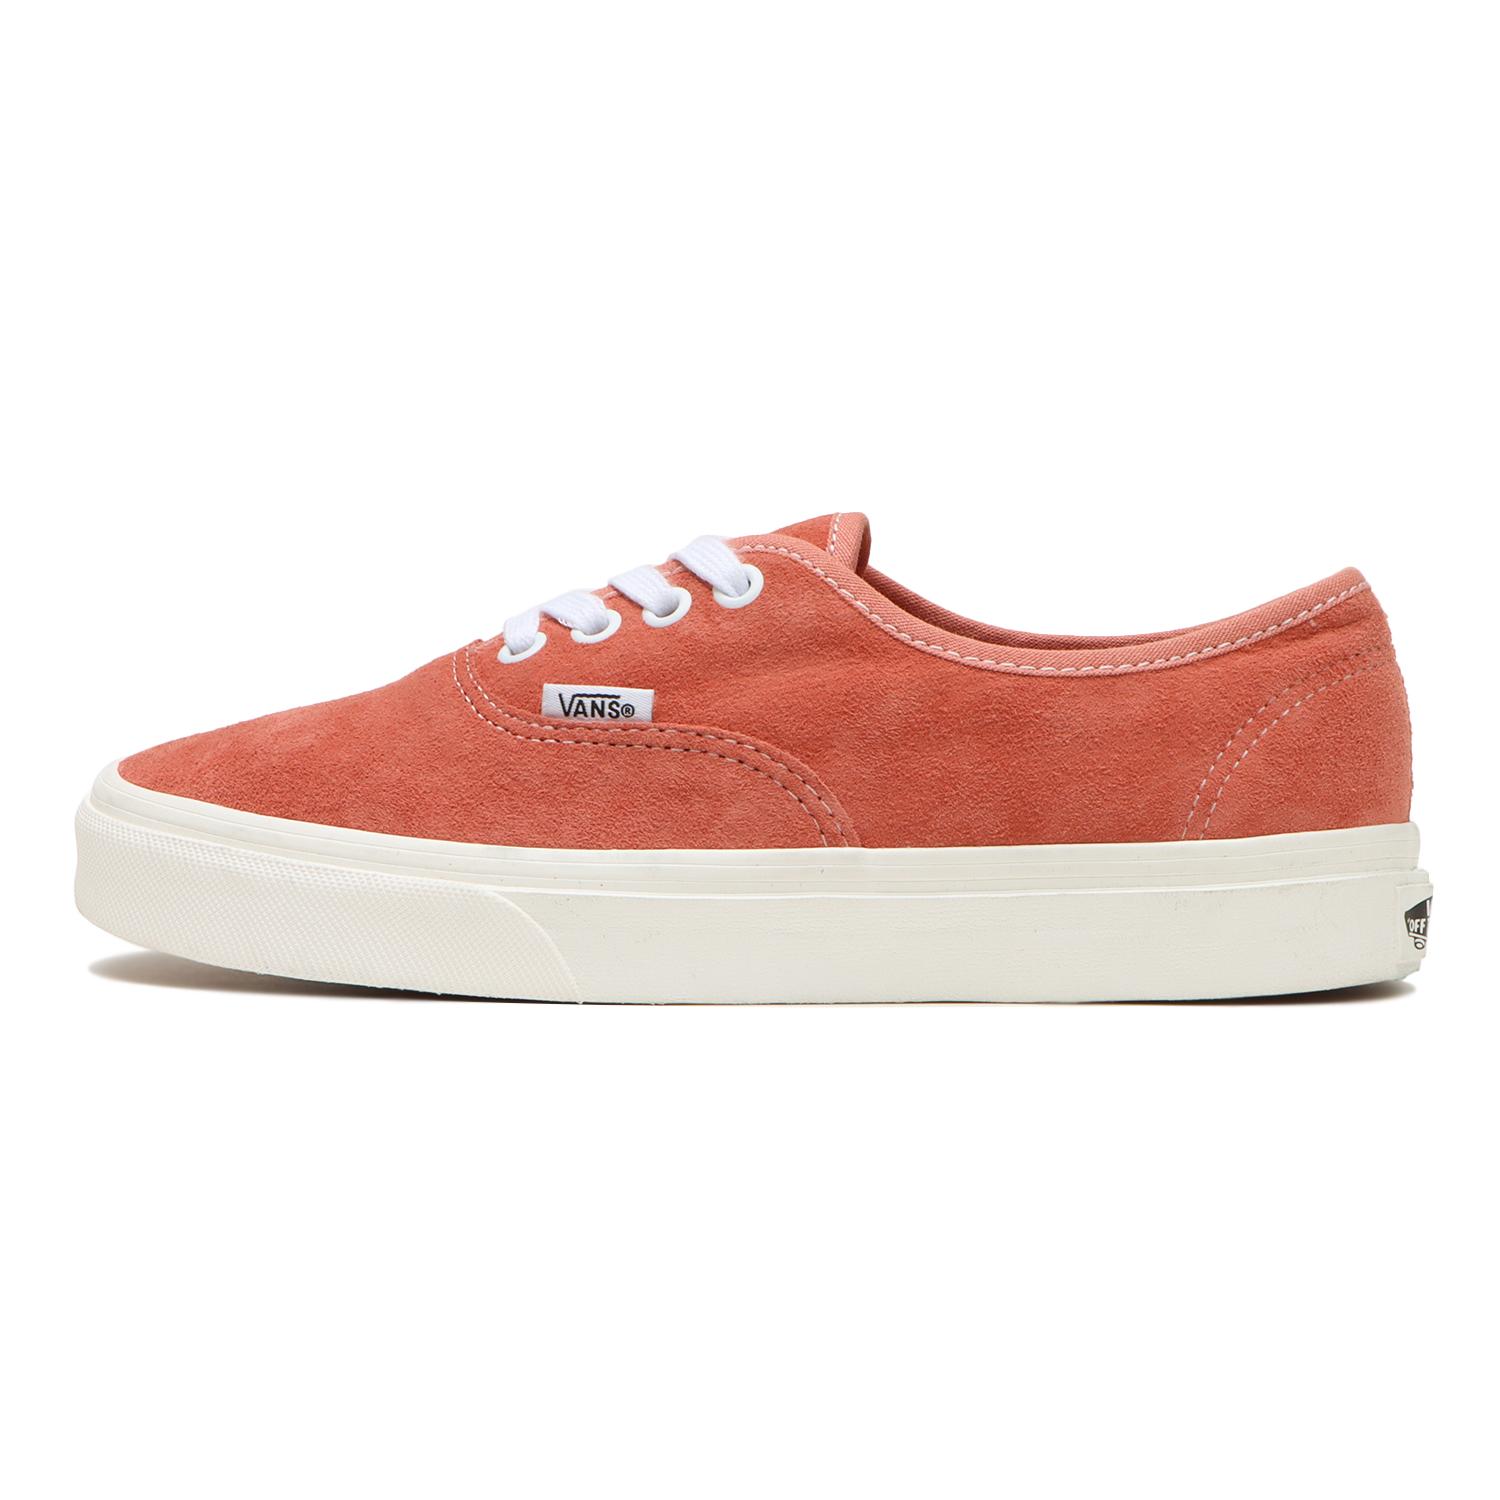 ≪Pig Suede Collection≫ 【VANS】 ヴァンズ AUTHENTIC オーセンティック VN0A5HZS9GA (PIG)TERRA